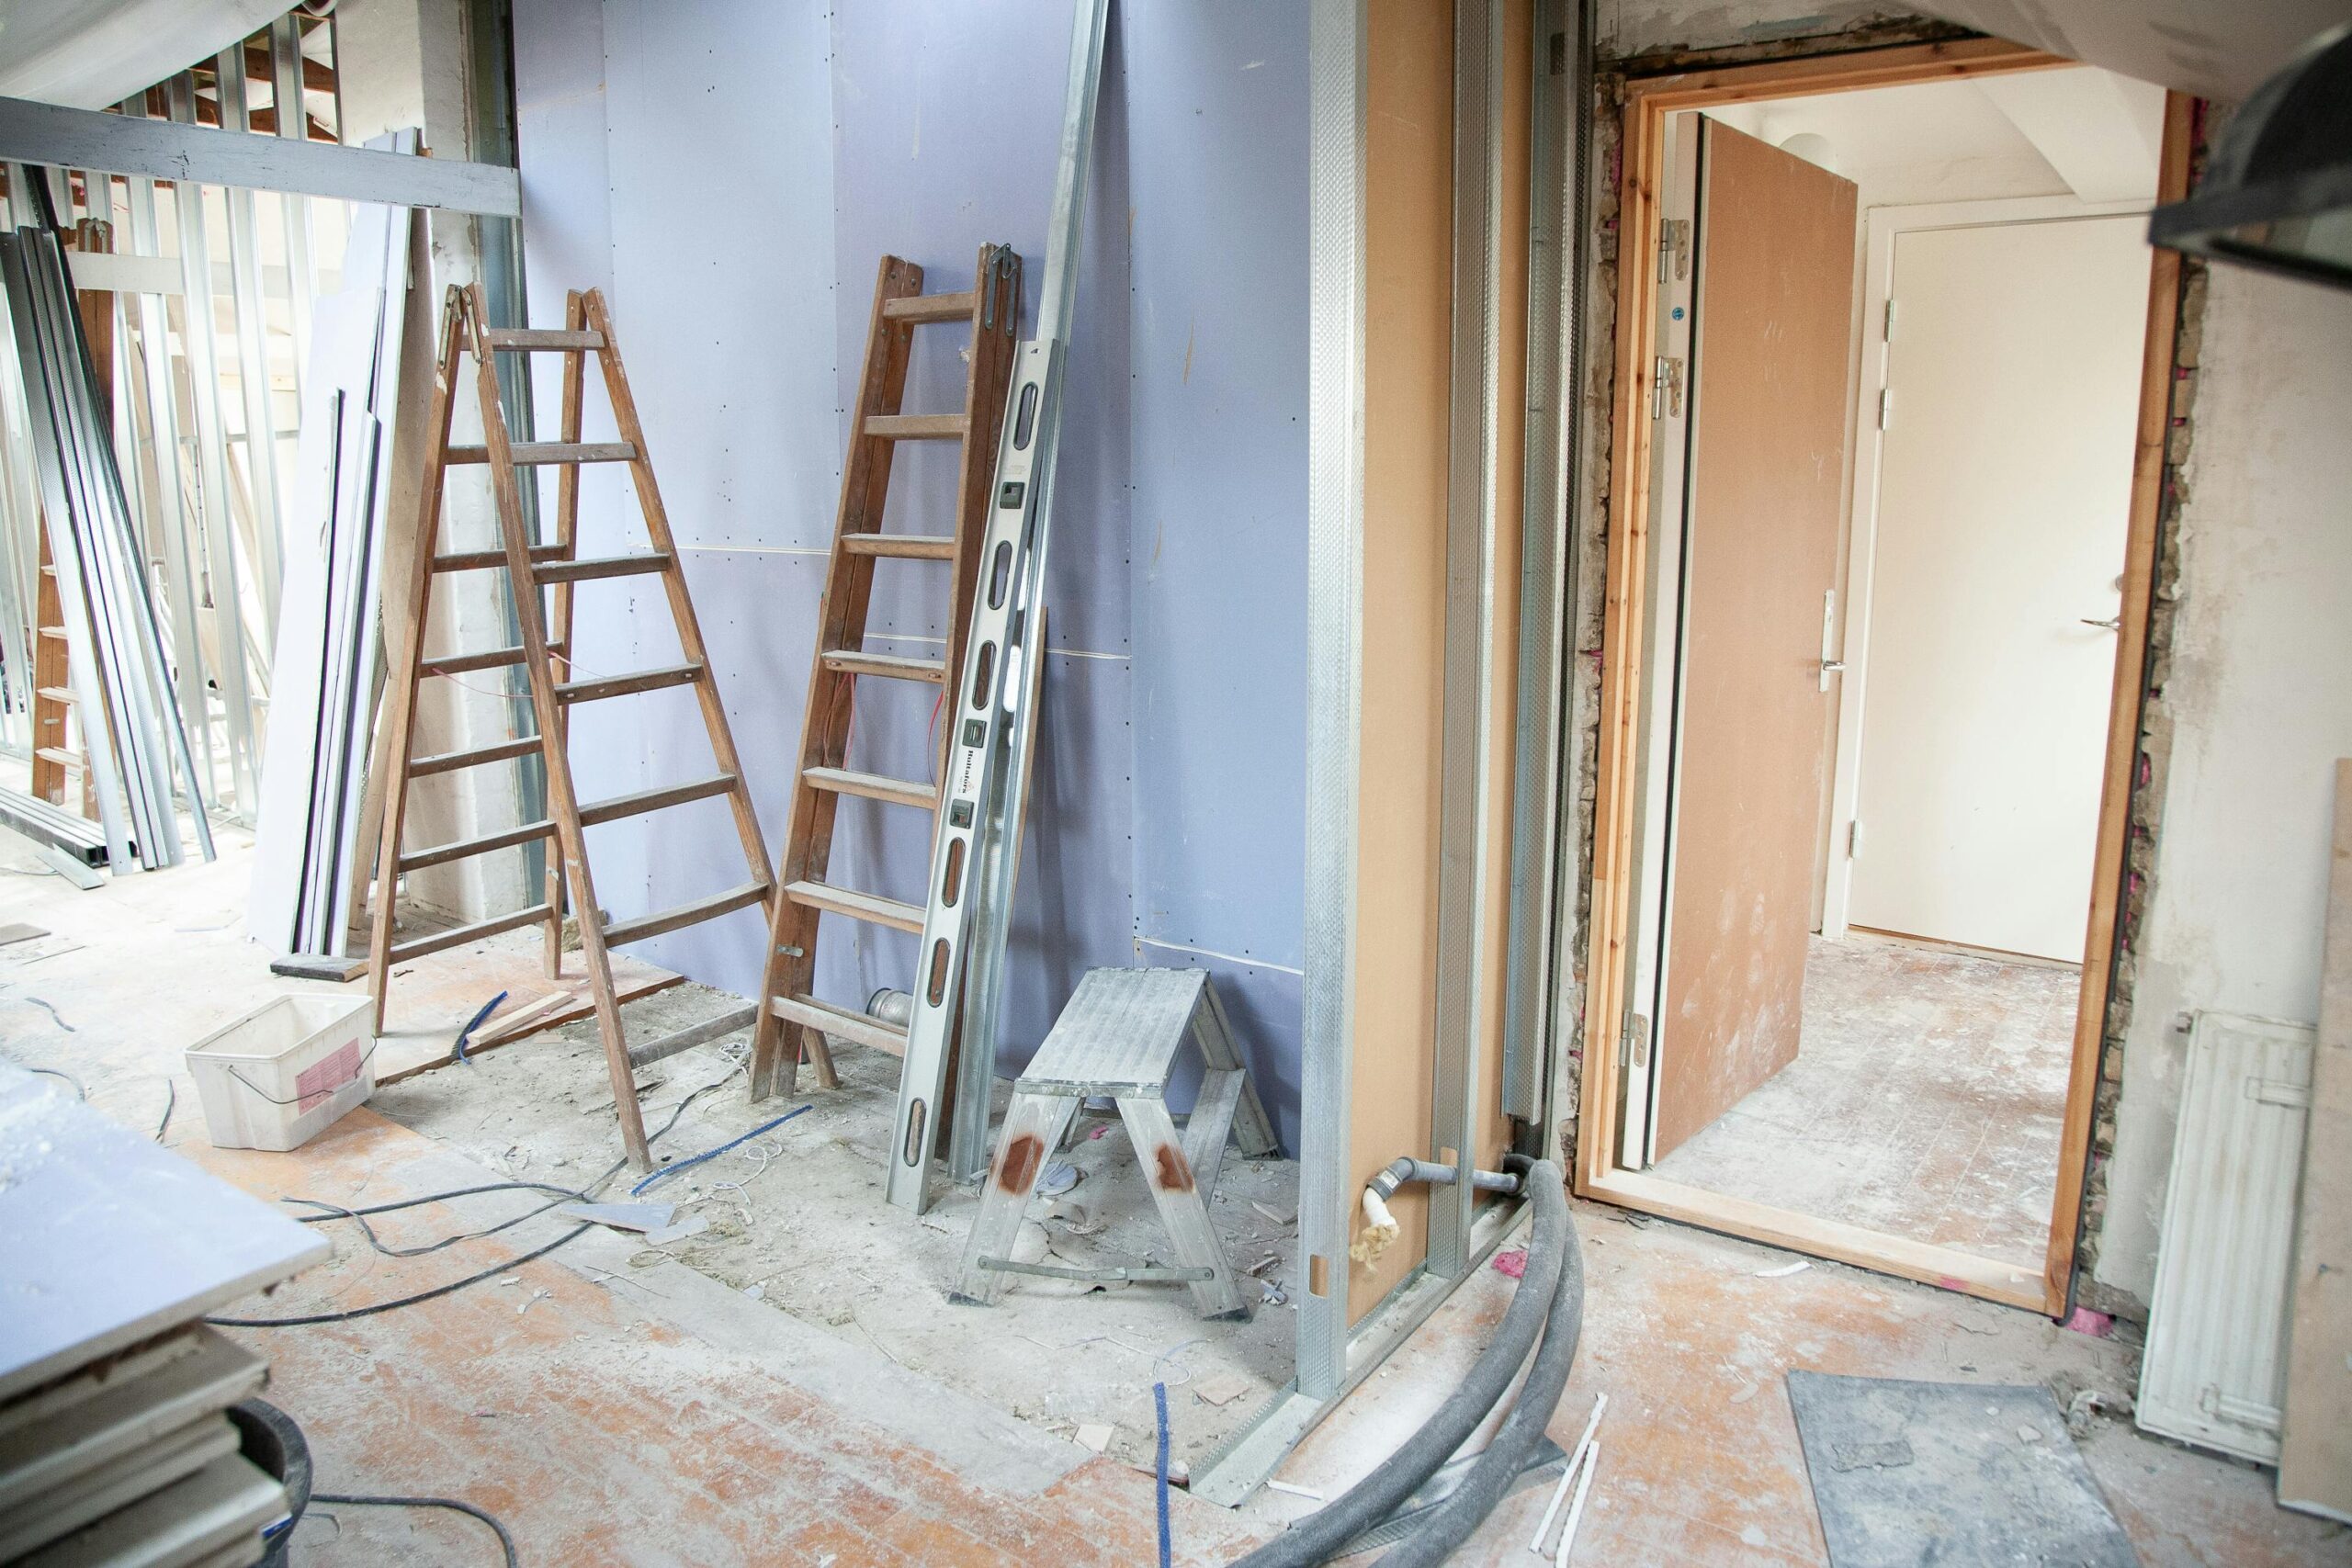 Building Dreams How the Right General Contractor Can Make Your Home Renovation Vision a Reality